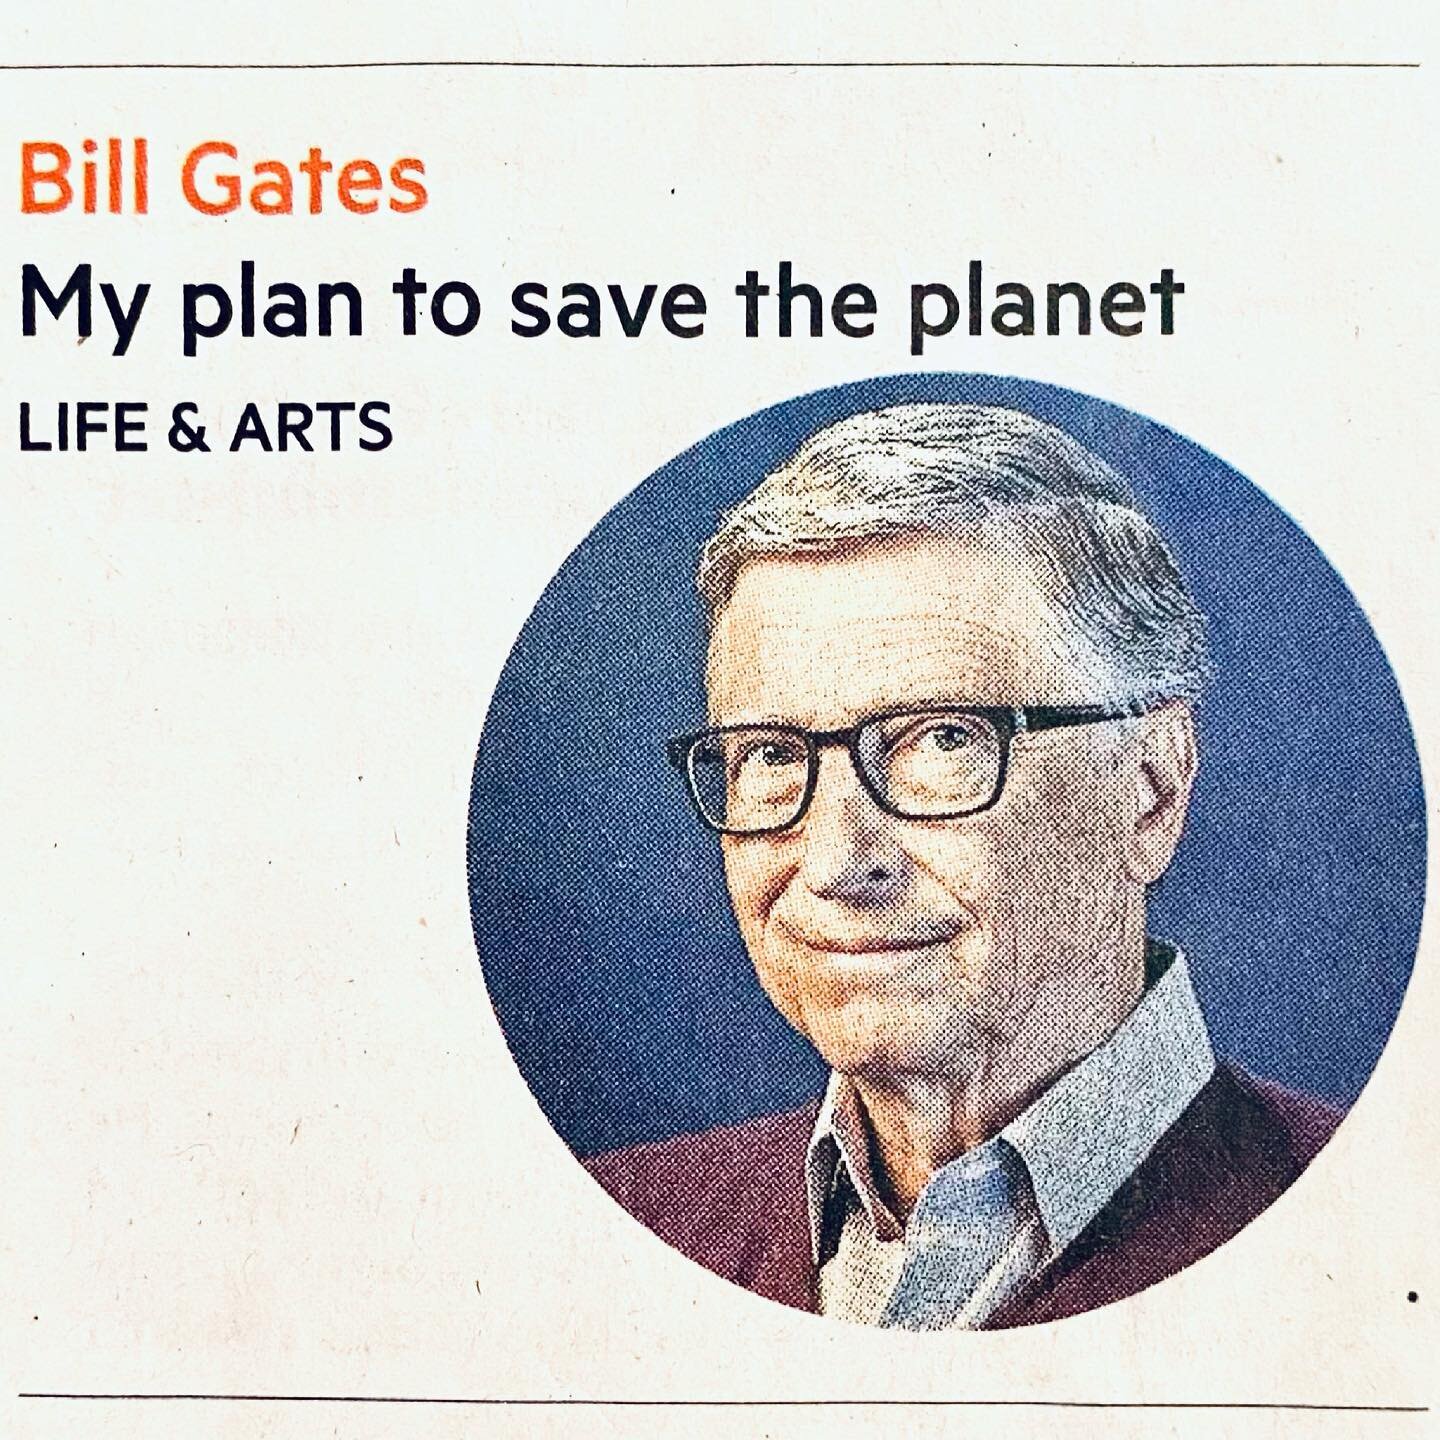 I spent the day thinking about my plan to set my week up for success.  Then I saw this article from Bill Gates in the Financial Times.  It might be time for me to think a little bigger:) I love the story of Bill Gates giving a presentation on the imp